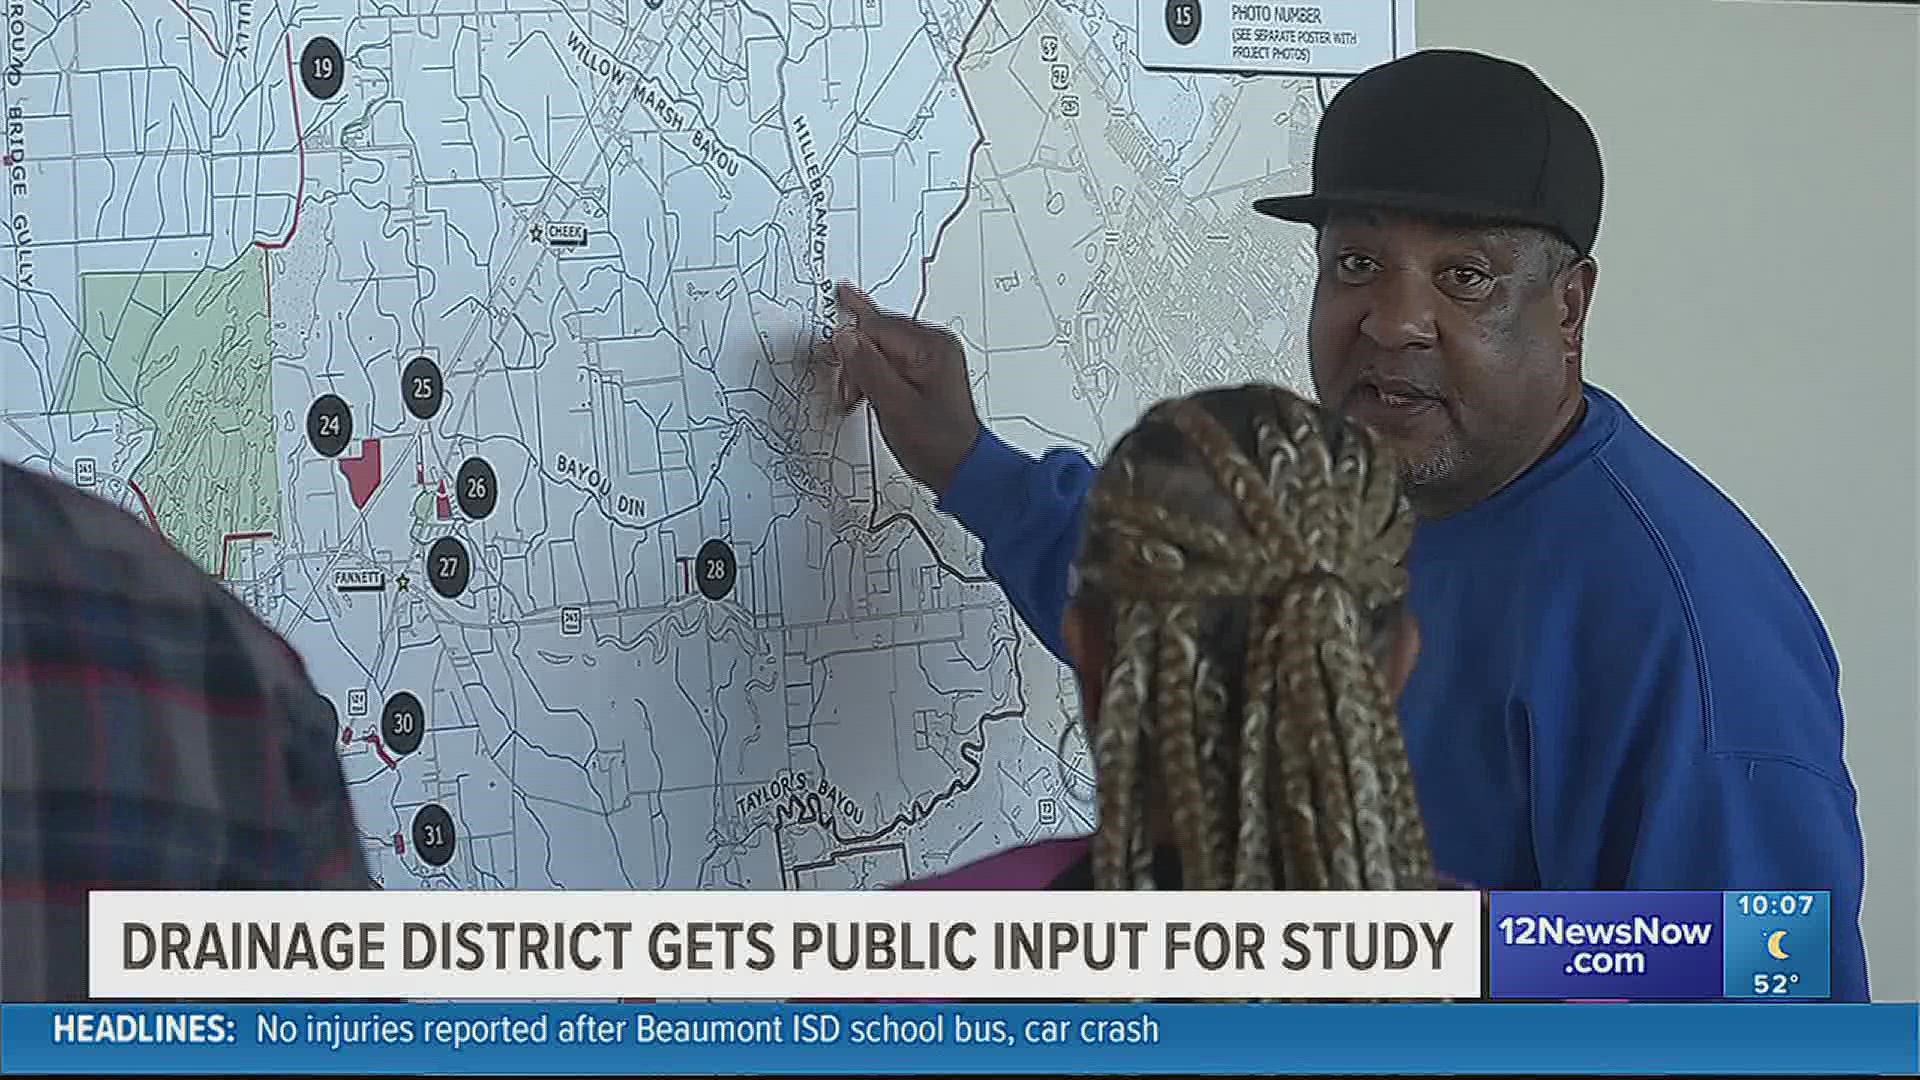 DD6 is working on an $8.5 million regional watershed study, so they called on the public to point out hotspots that might need attention.